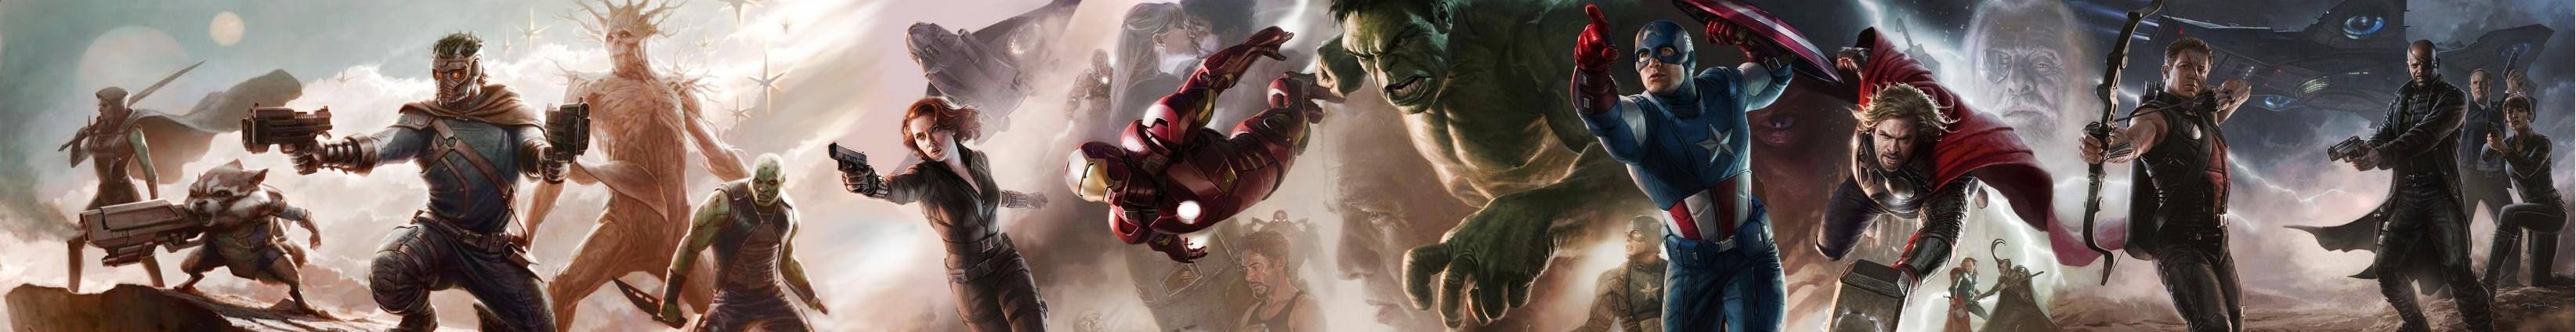 The-Avengers-Guardians-of-the-Galaxy-Concept-Art-Posters-Combined